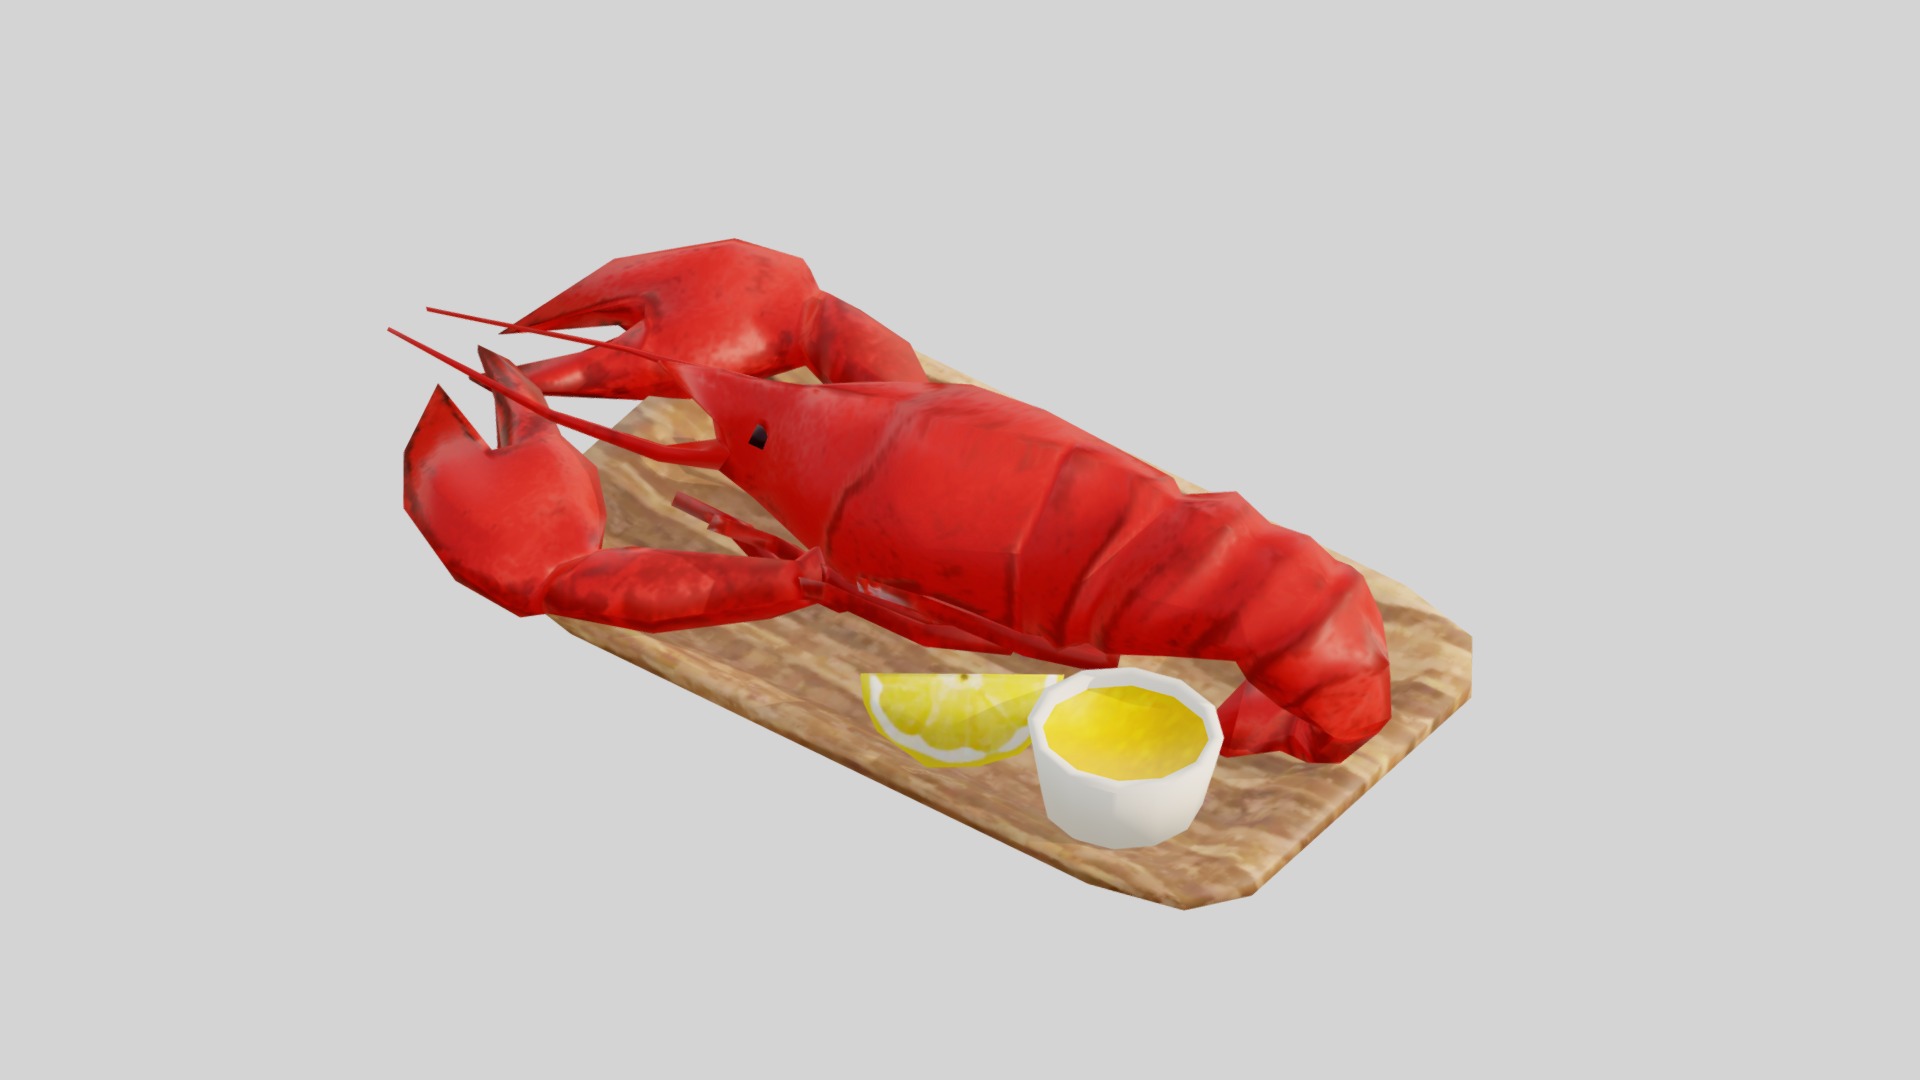 3D model Lobster Low-poly G09 - This is a 3D model of the Lobster Low-poly G09. The 3D model is about a red bird on a cutting board.